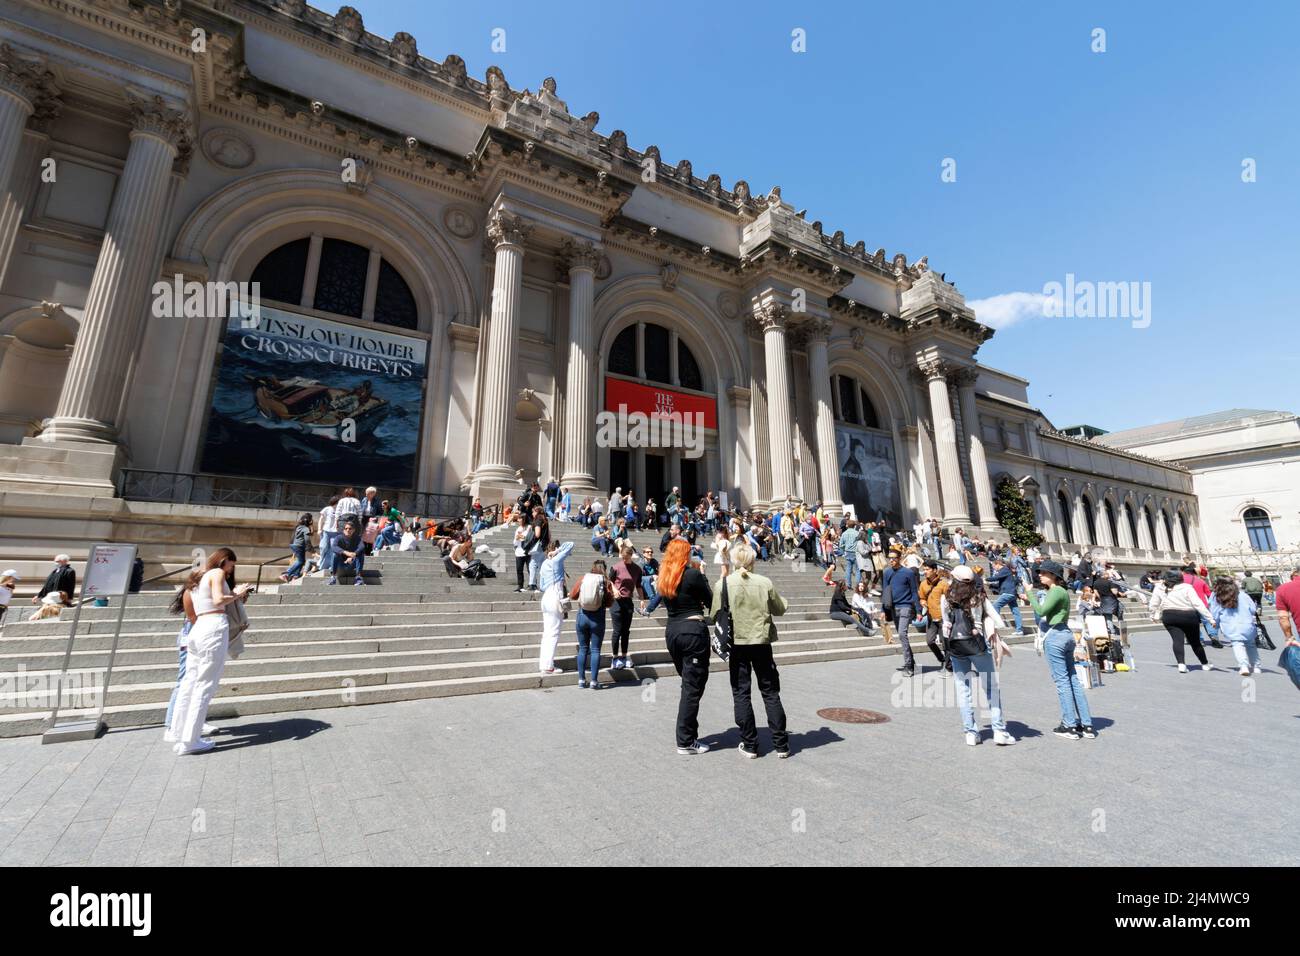 People walk and sit around the grand staircase entrance to the Metropolitan Museum of Art on fifth avenue on a beautiful Spring day Stock Photo